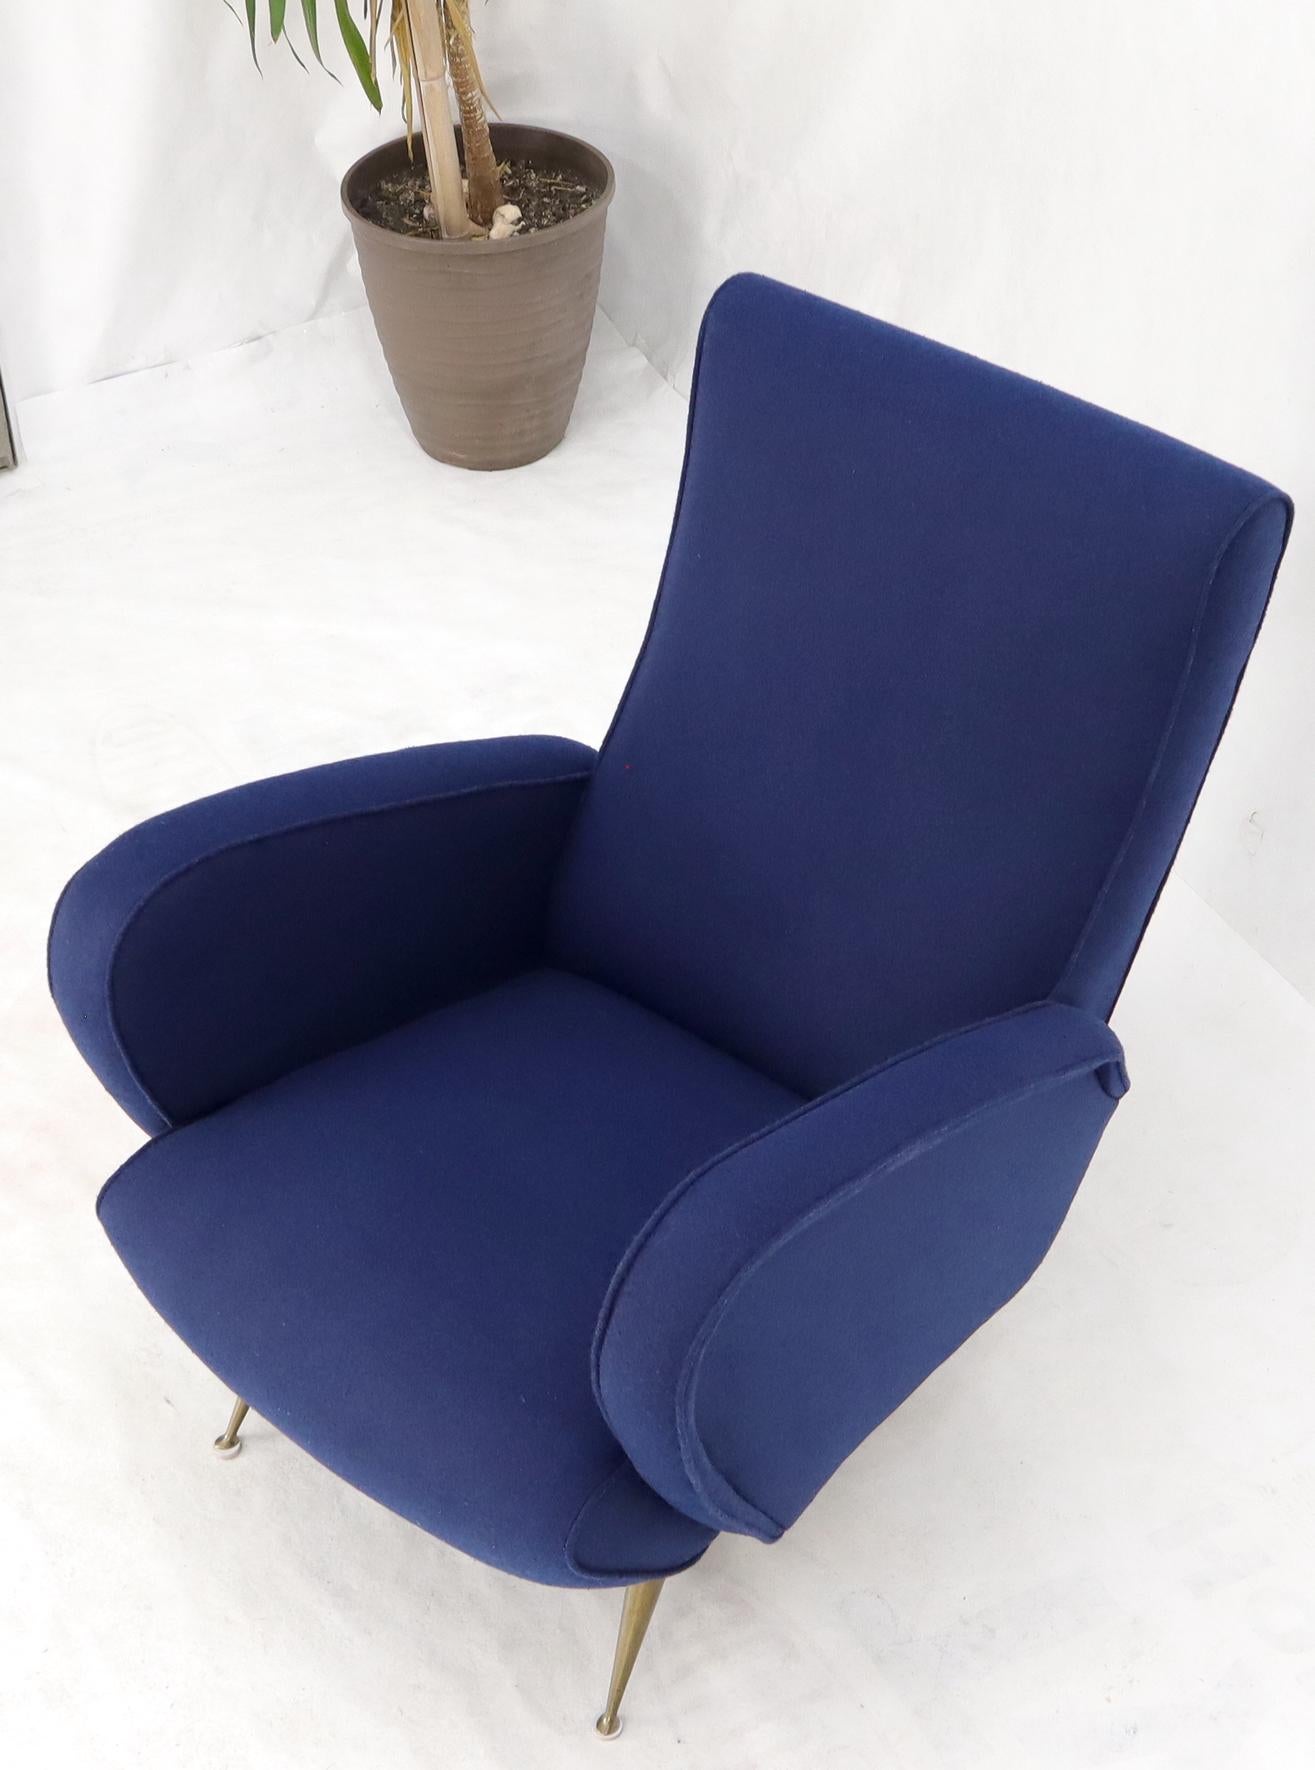 20th Century New Navy Blue Upholstery Italian Mid-Century Modern Lounge Chair on Brass Legs For Sale